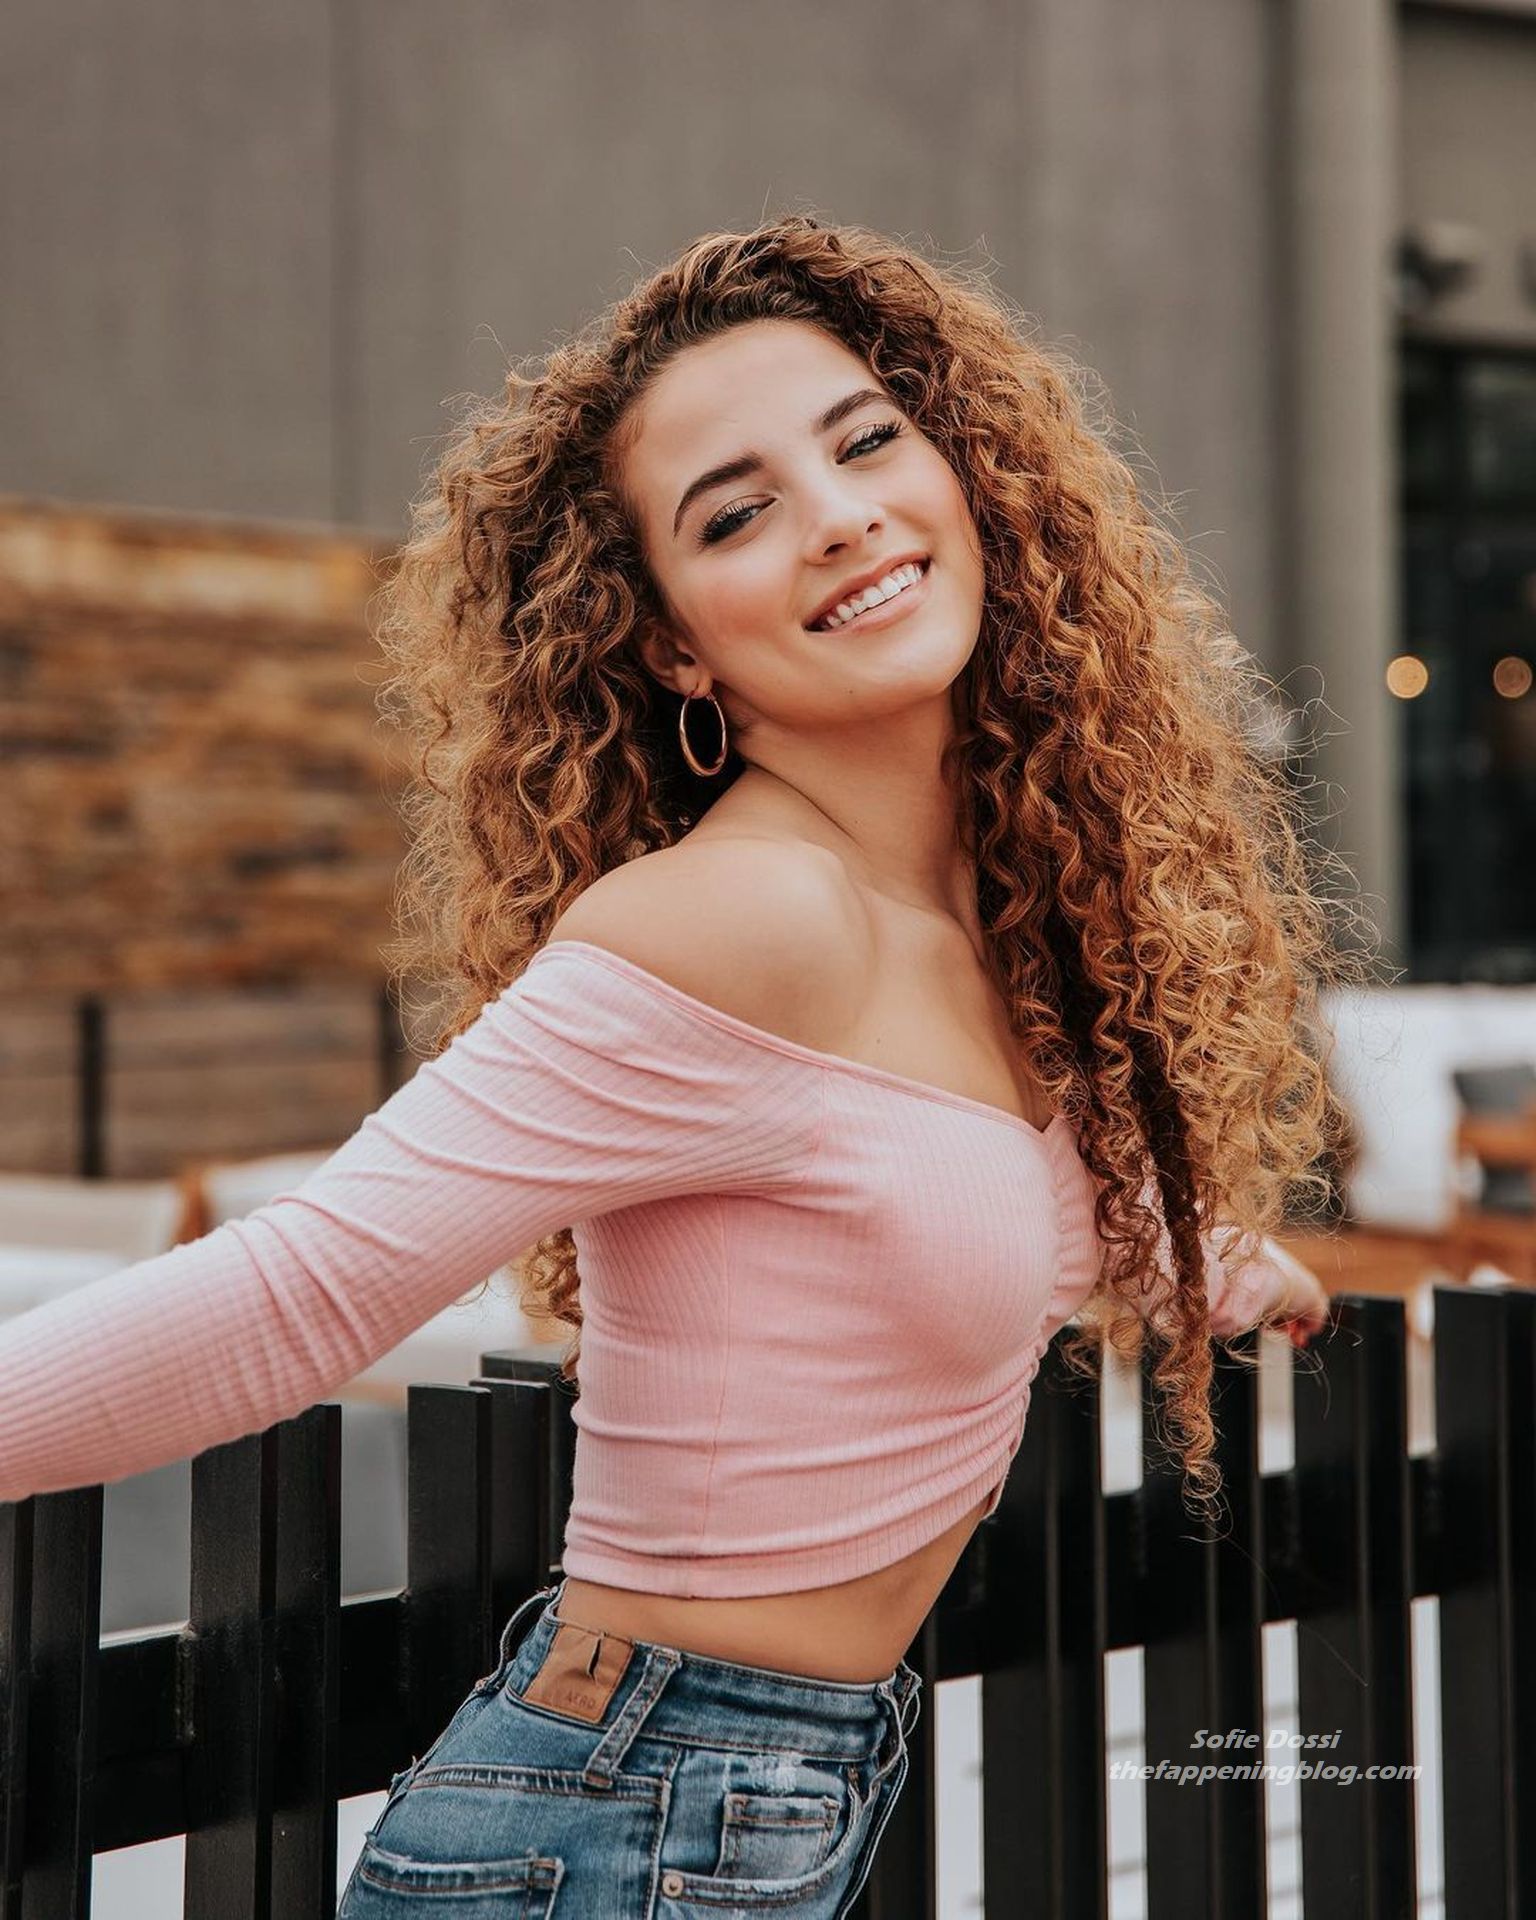 Sofie Dossi Shows Off Her Ass & Tits (36 Photos + Videos) .